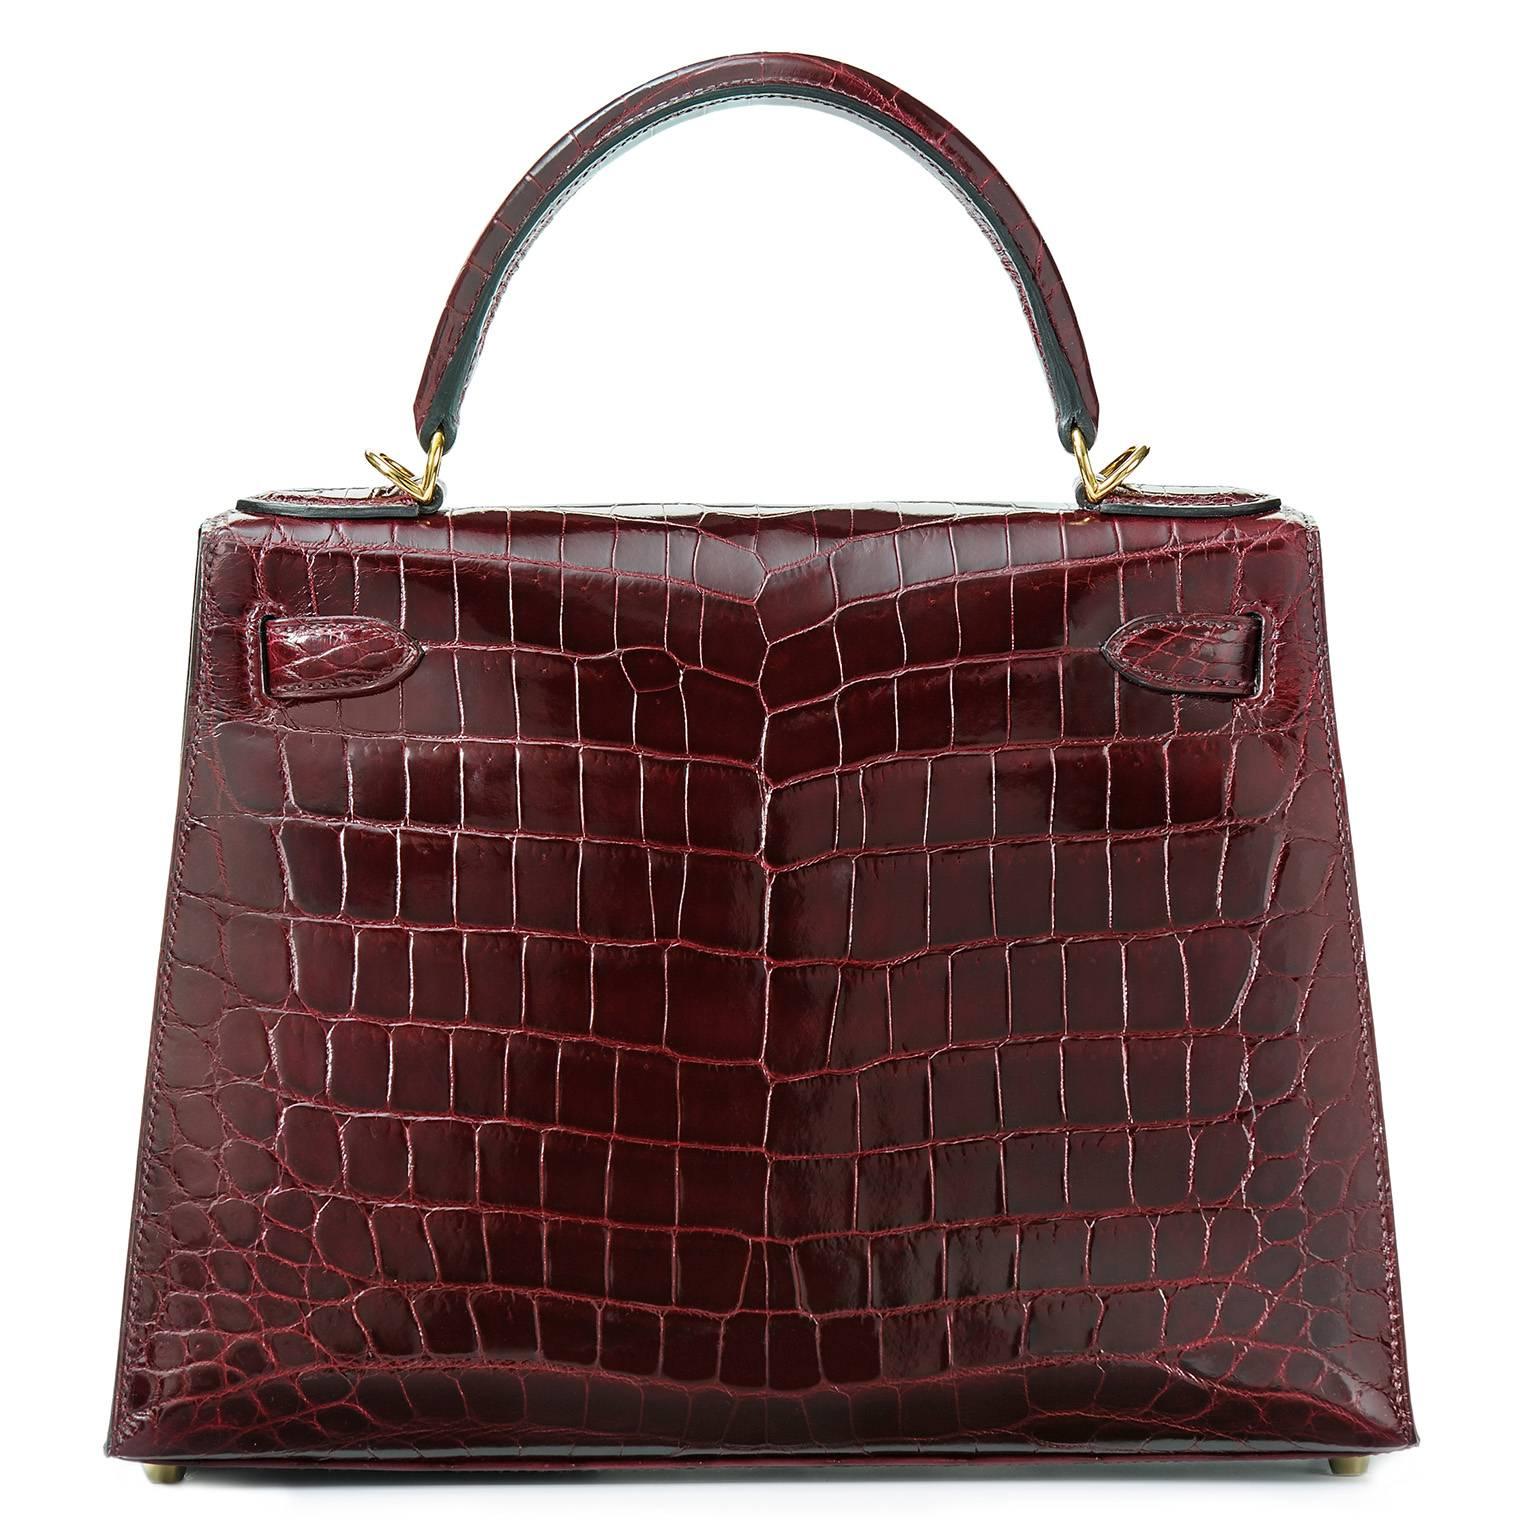 Stunning beauty!!!!
All time classic!!!

28 cm Kelly Sellier made of Niloticus Crocodile skin in Bordeaux with GOLD hardware!!!

This beautiful bag comes as a full set:
bag, clochette, lock, keys, shoulder belt, dust bags, rain protection